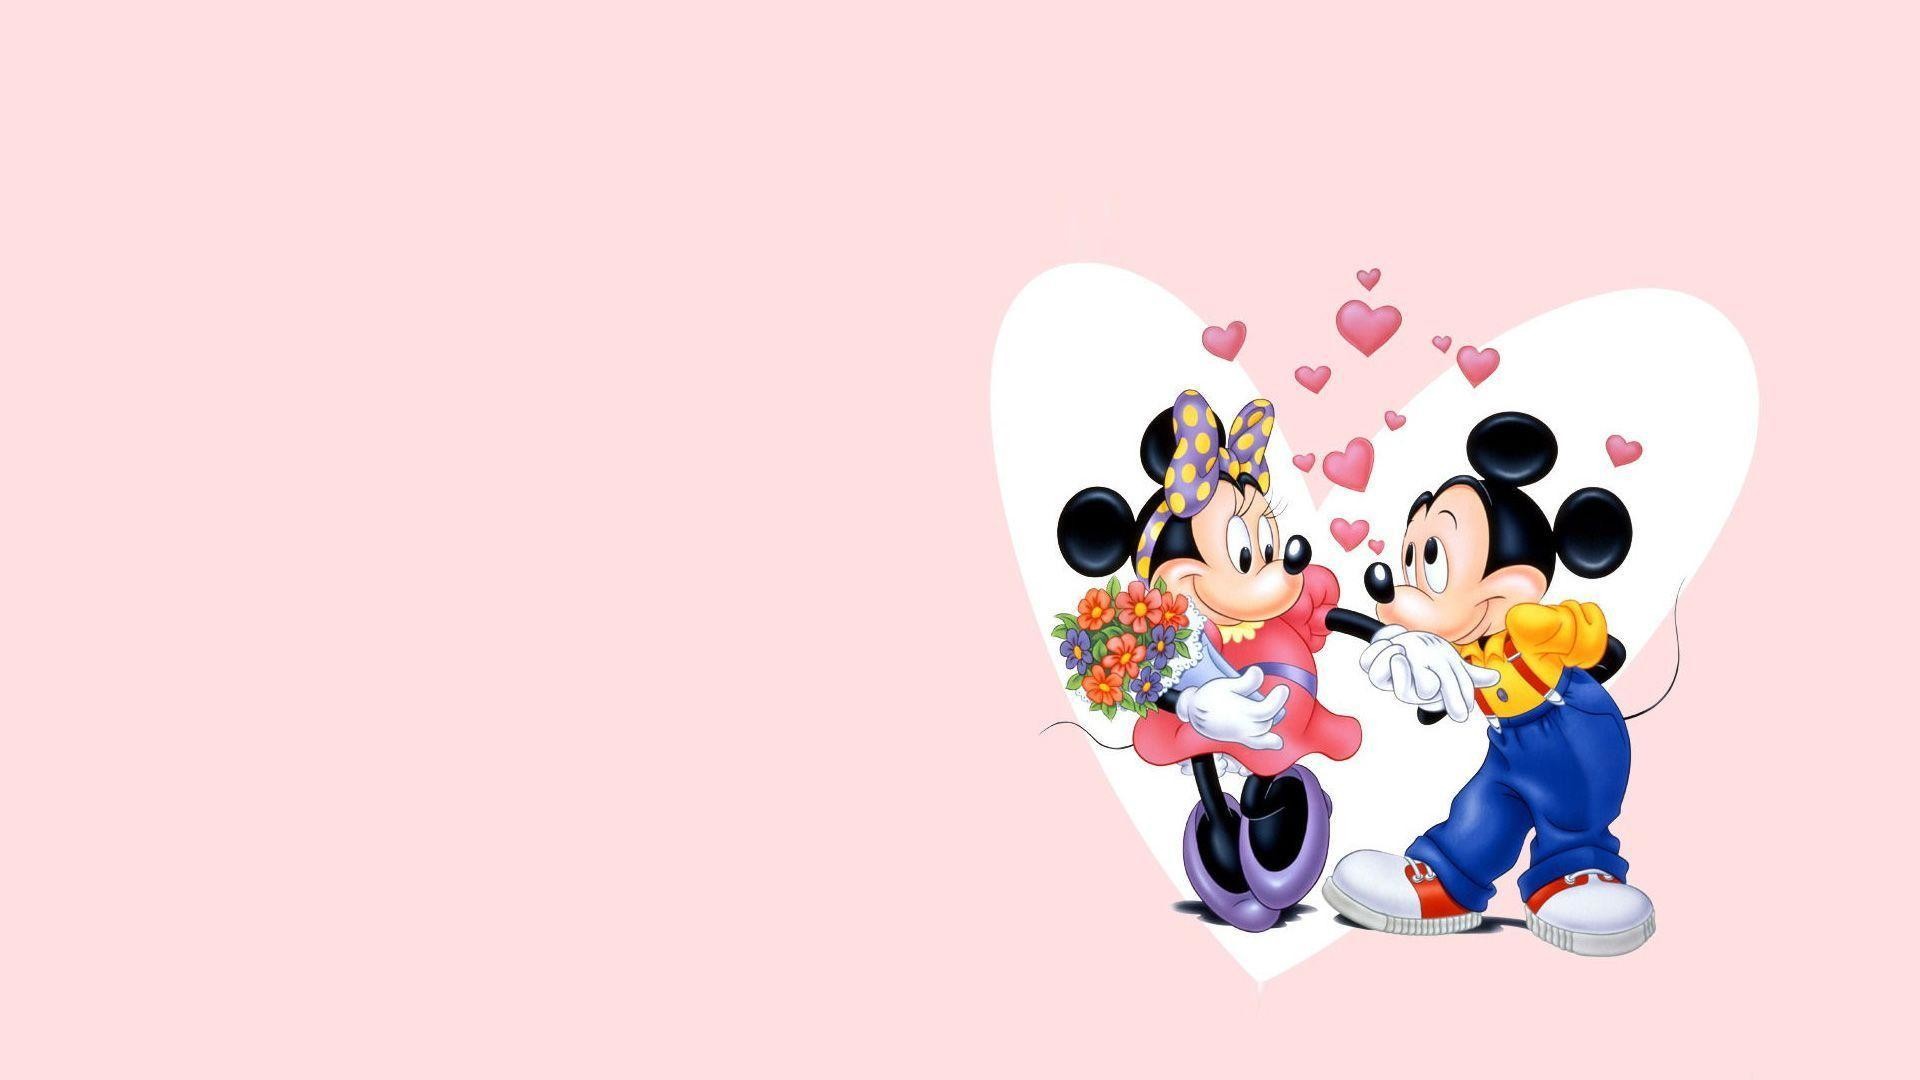 1920x1080 Mickey Mouse And Minnie Mouse Wallpapers | Foolhardi.